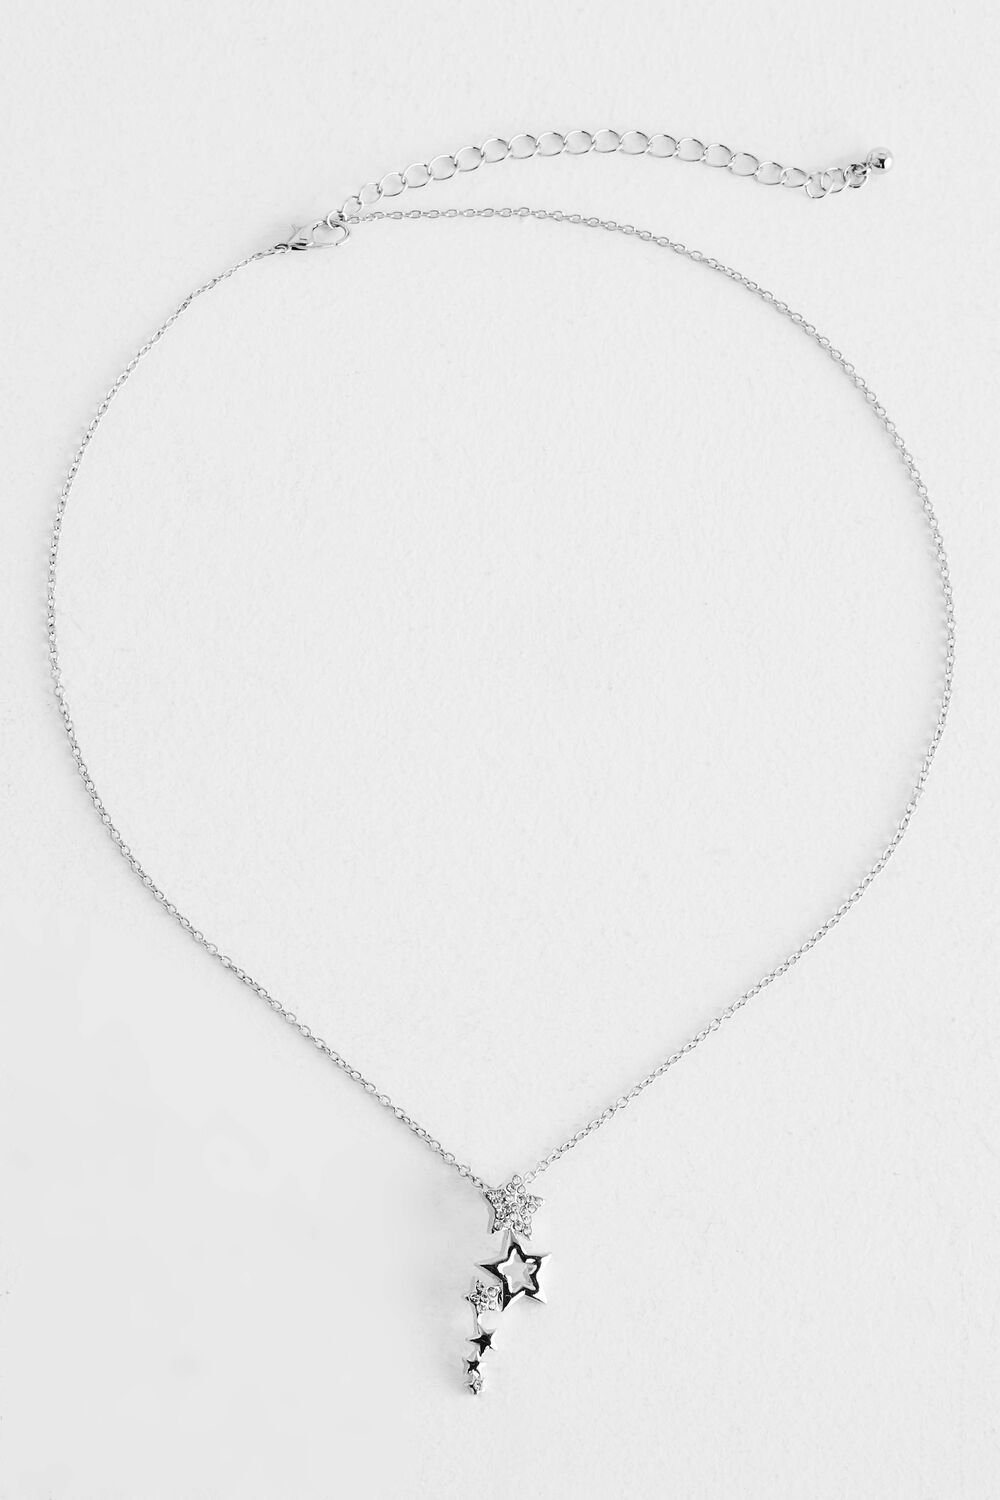 Bonmarche Silver Star Cluster Necklace, Size: One Size